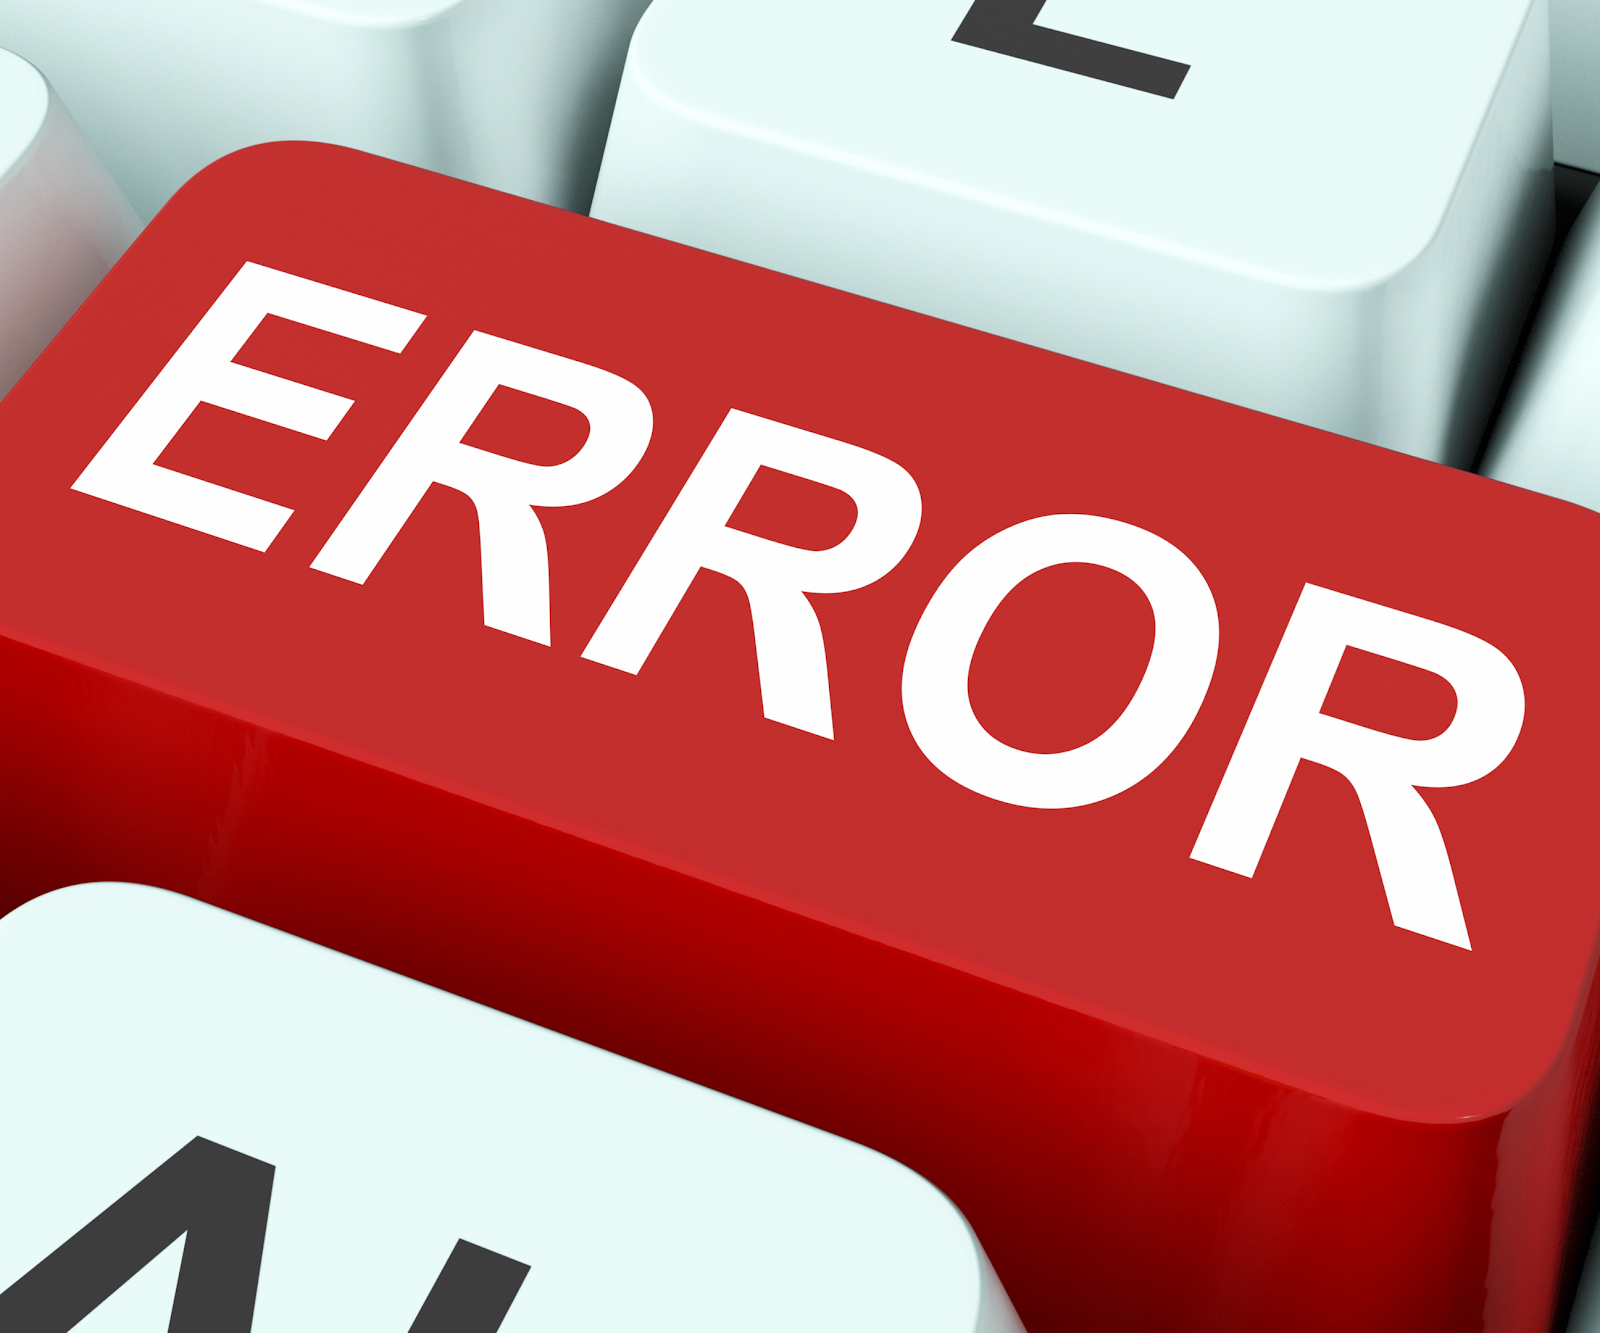 A red keyboard key with the word "ERROR" on top.